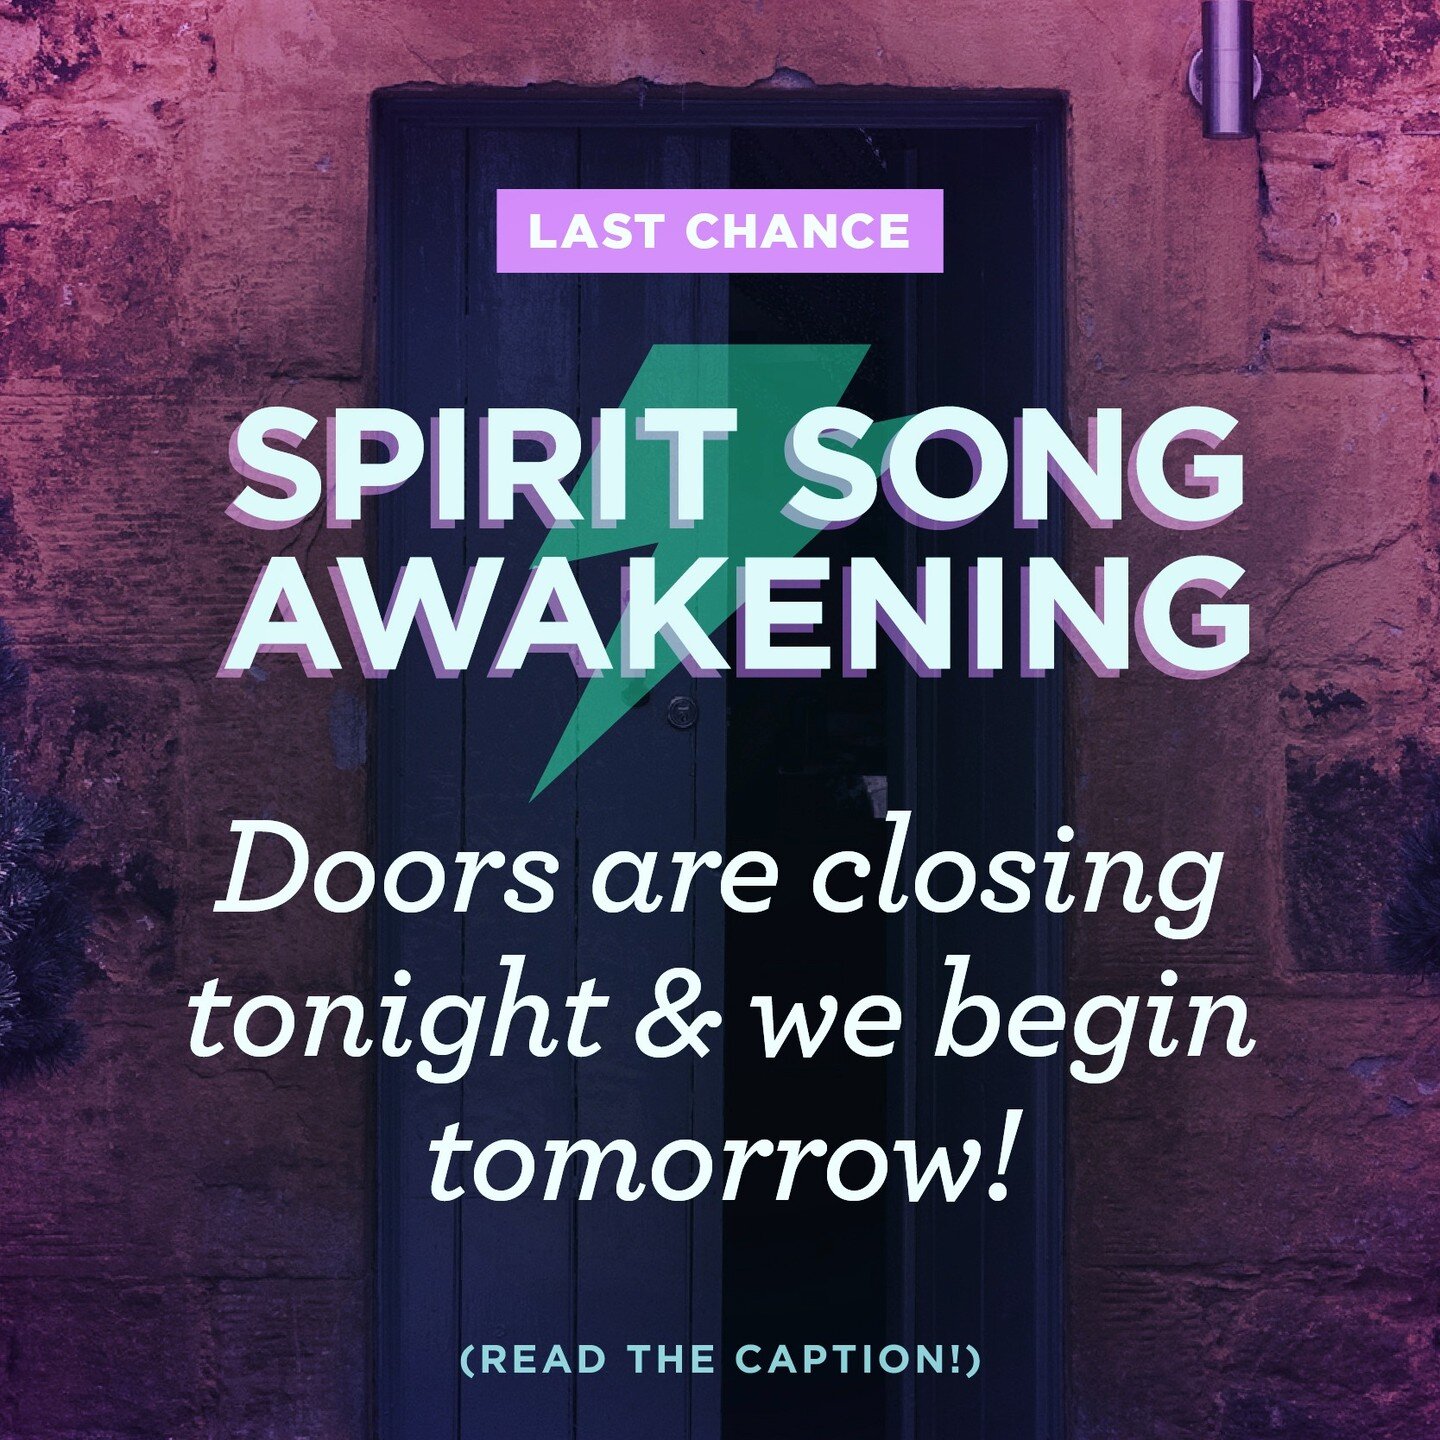 If you&rsquo;ve been longing to receive songs for healing &amp; empower your expression, this is the last day to enroll in the FINAL Spirit Song Awakening journey of 2022! ⚡

After 5 weeks, walk away with:

➾ More confidence to easefully create &amp;